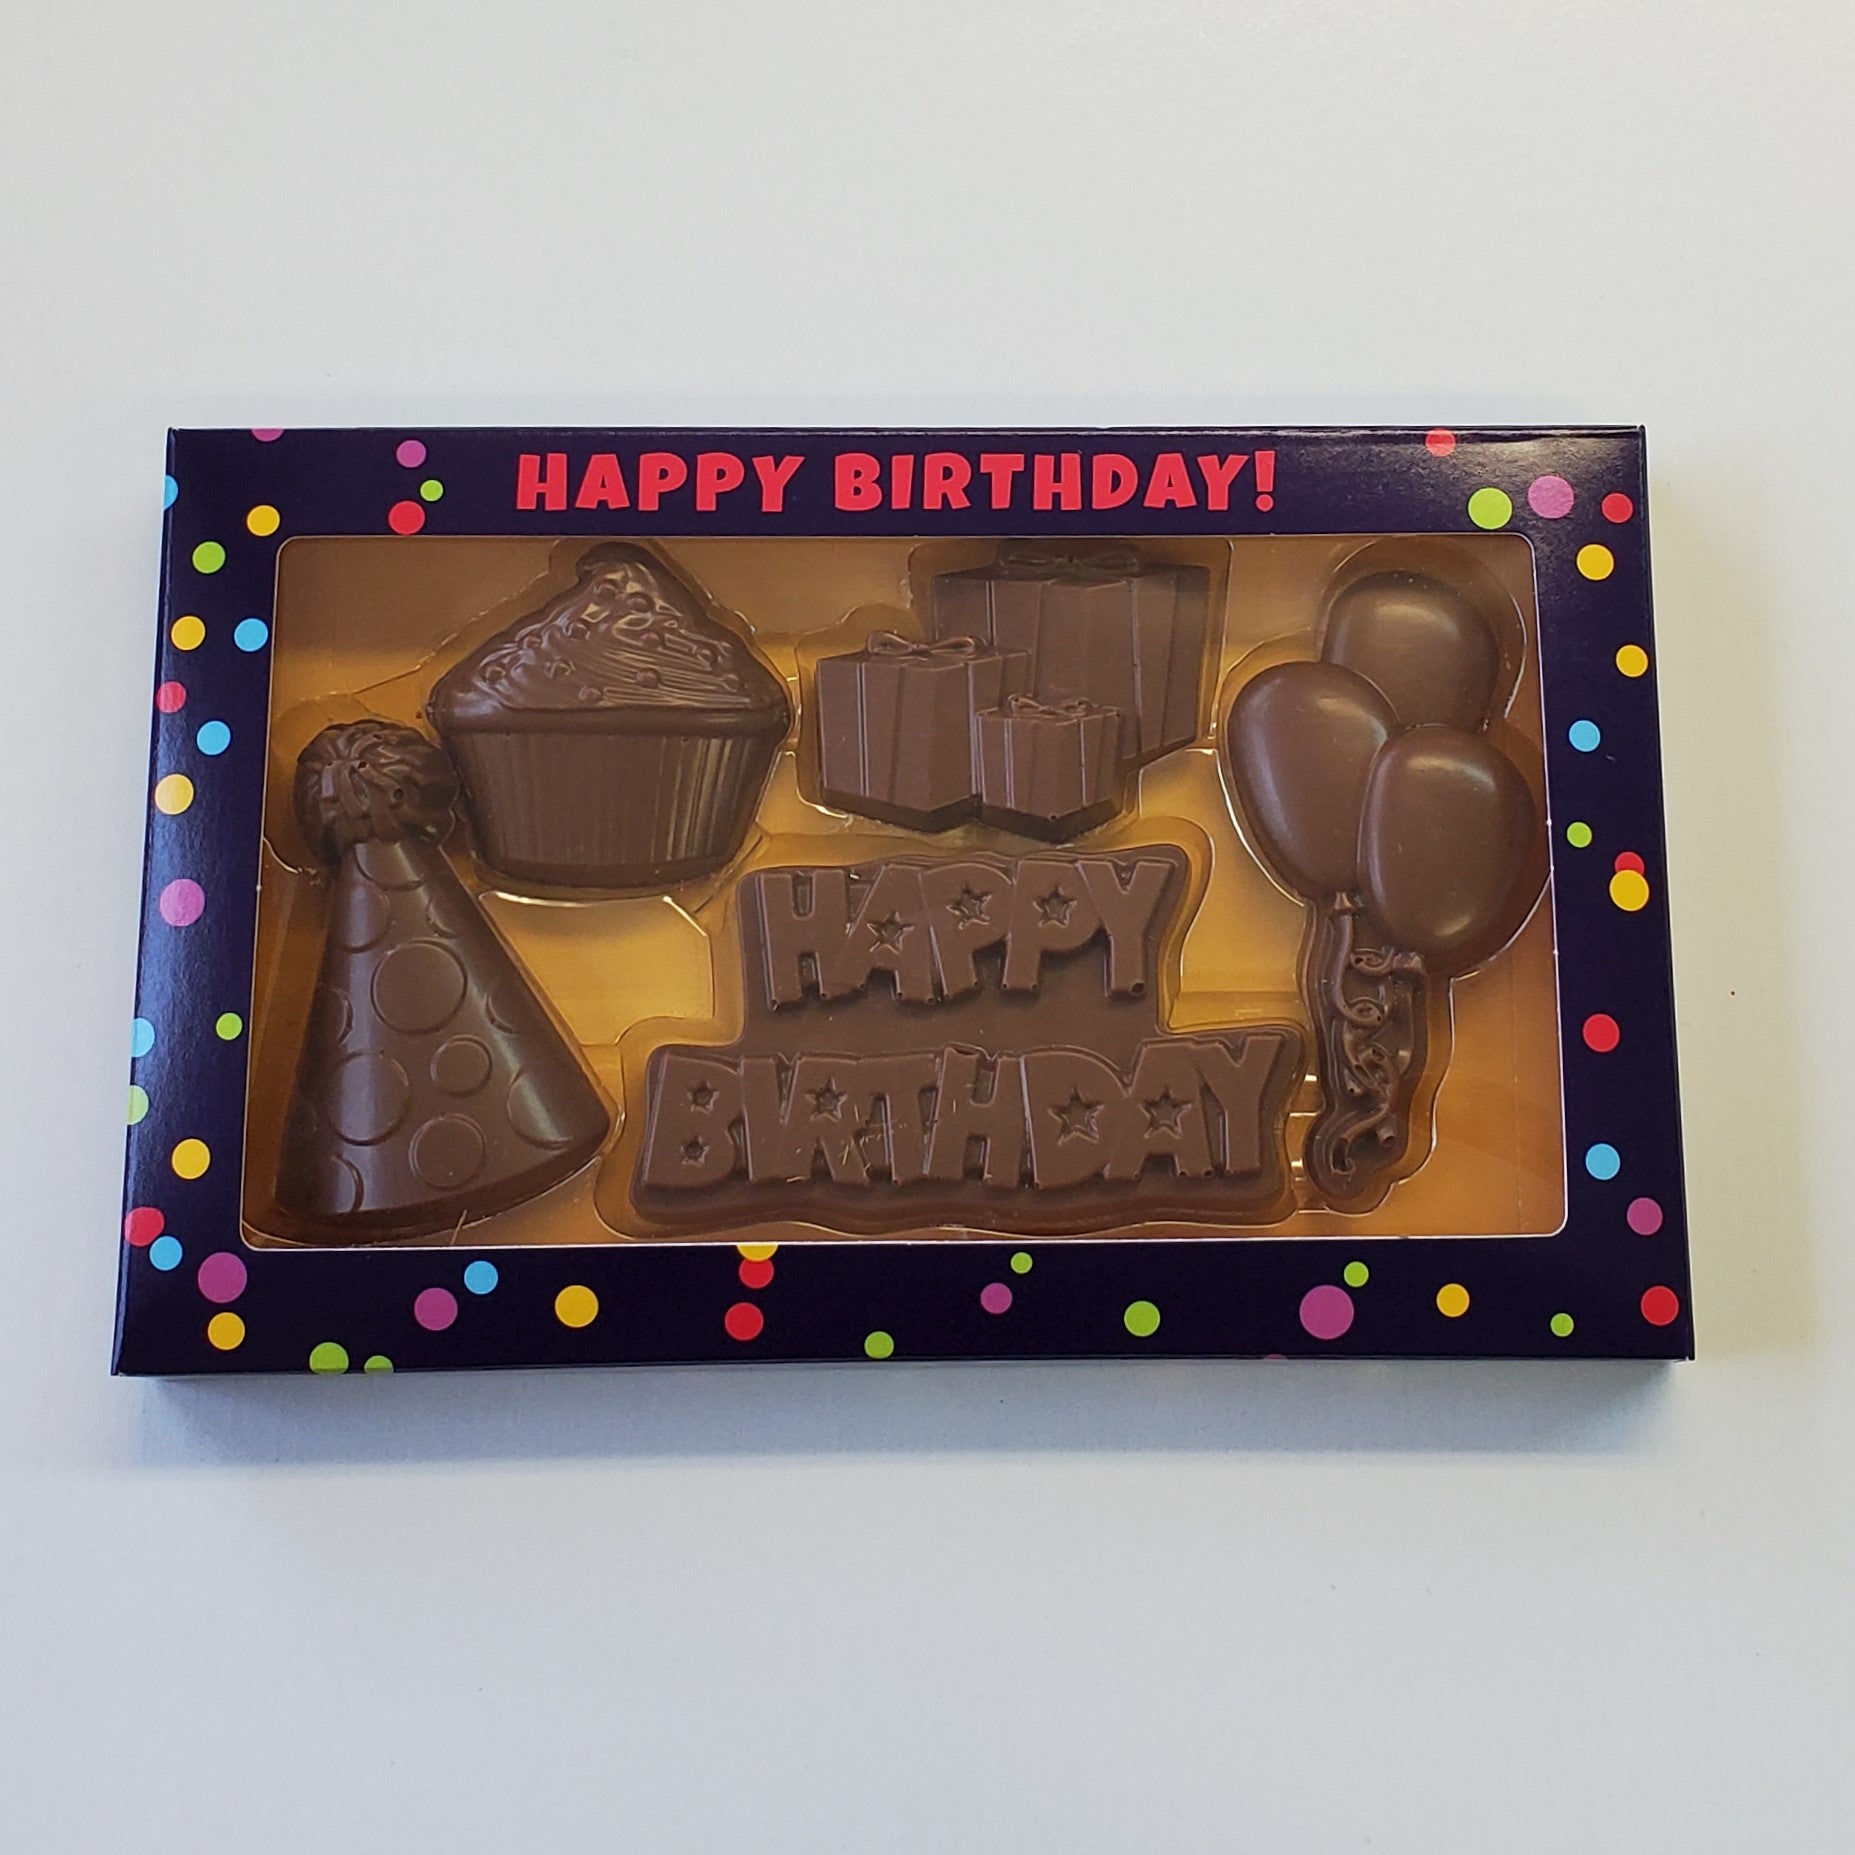 Milk Chocolate Happy Birthday Box Gift Set includes a party hat, cupcake, presents, balloons and Happy Birthday shaped chocolates